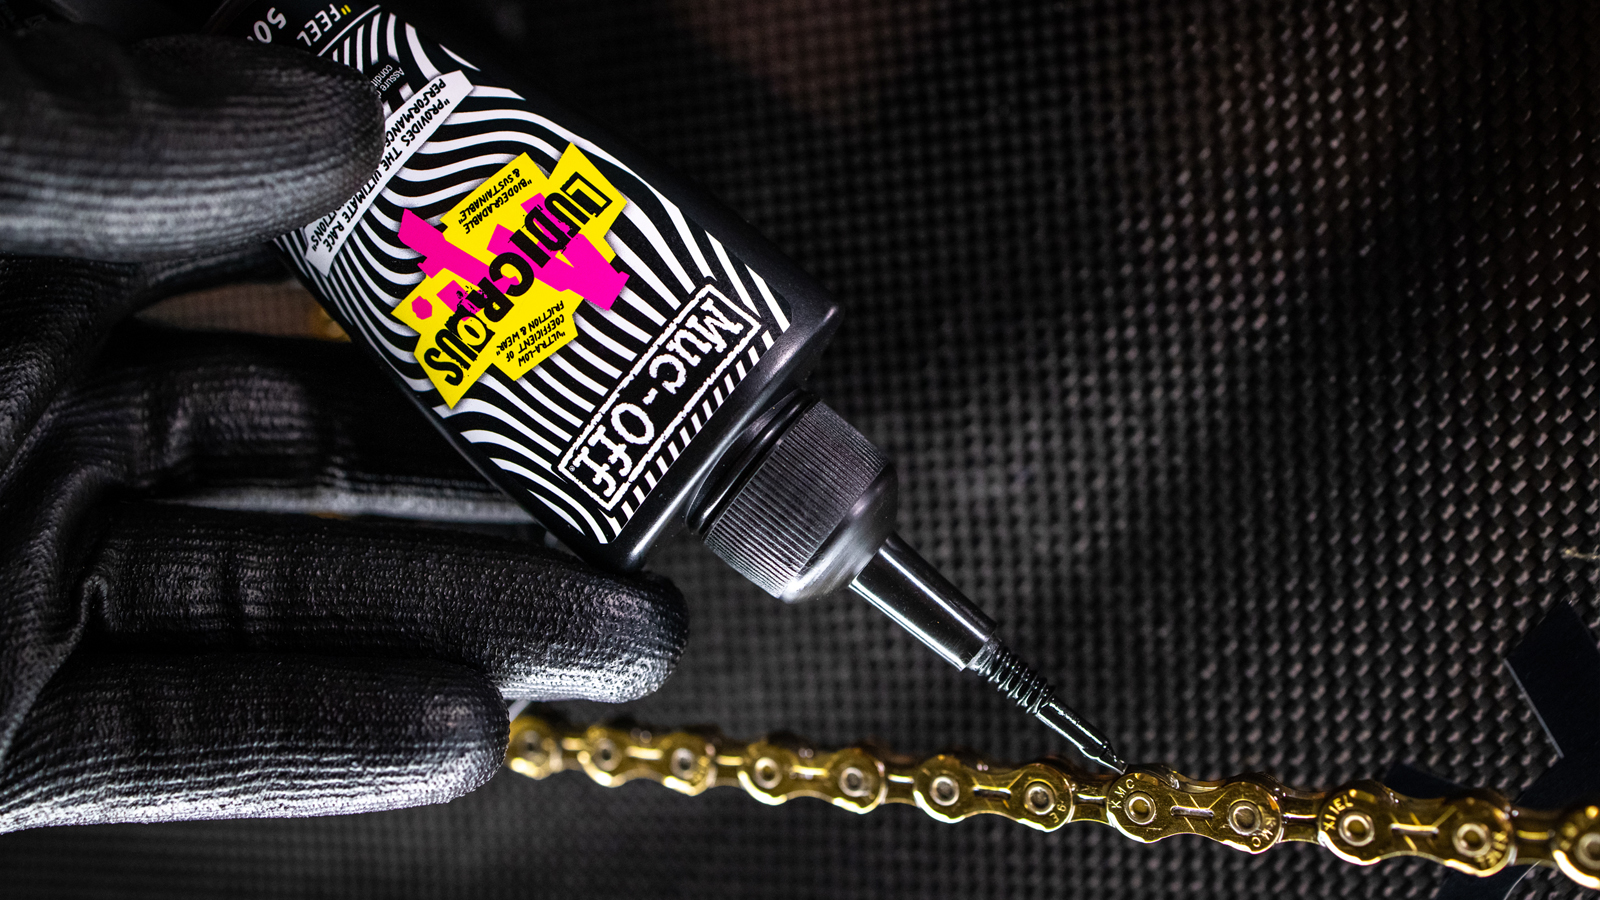 Coming Soon: Muc-Off Sex Lube 